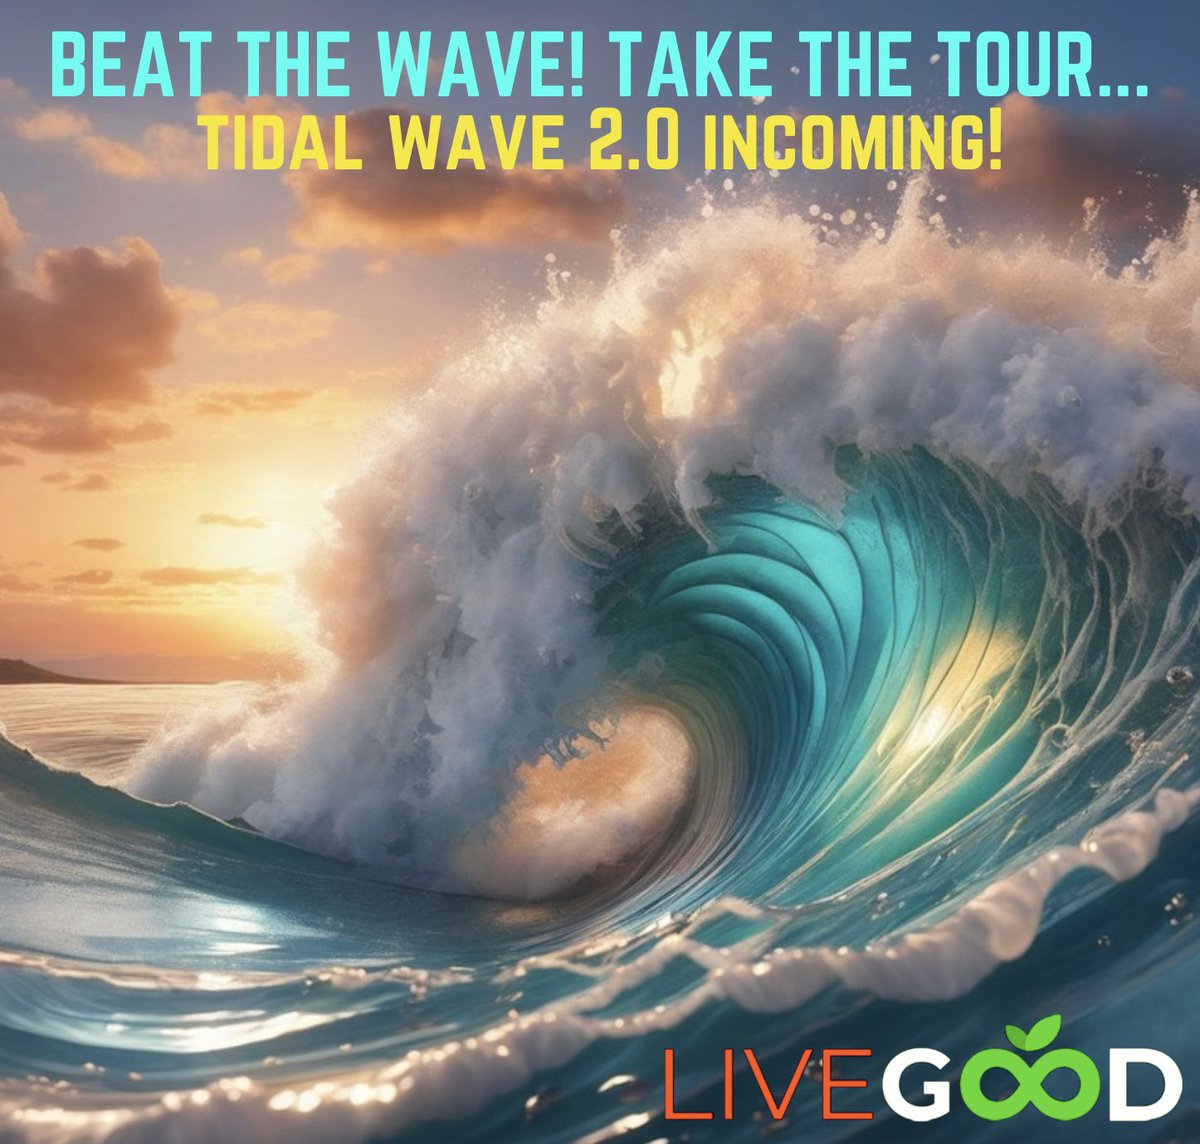 Ride the wellness wave with me! 🌊🚀 With LiveGood 2.0, we're slashing costs and elevating health. Who needs a lifejacket when you've got a tsunami of savings? Let's make waves together! Dive in 🌿💪 #HealthRevolution #LiveGoodWave Dive in: WorkWithSabien.com